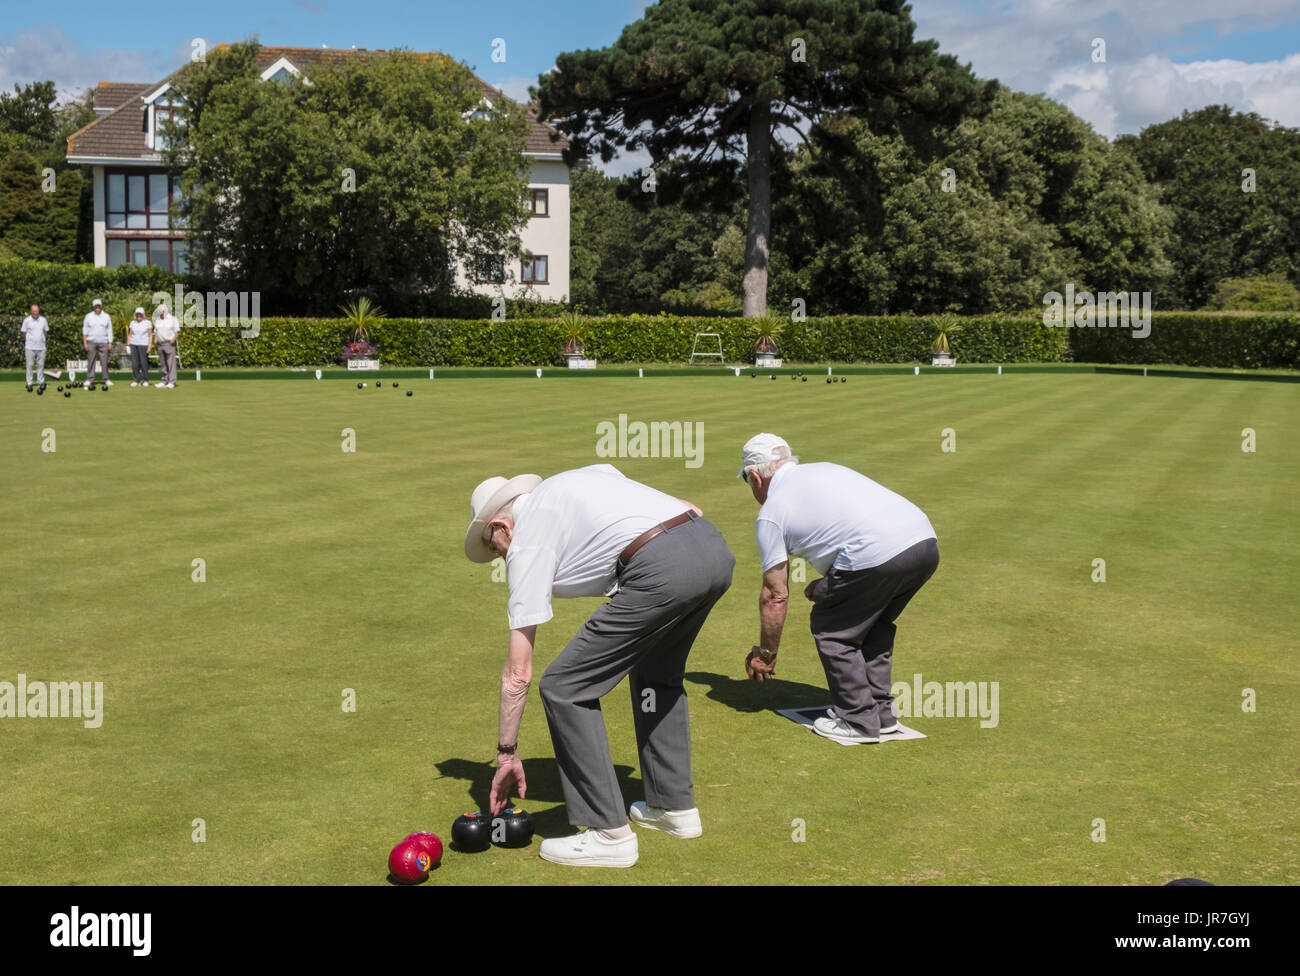 Two men bending down to play bowls on a bowling green at the Argyll Bowling Club, Westbourne, Bournemouth, Dorset, UK Stock Photo